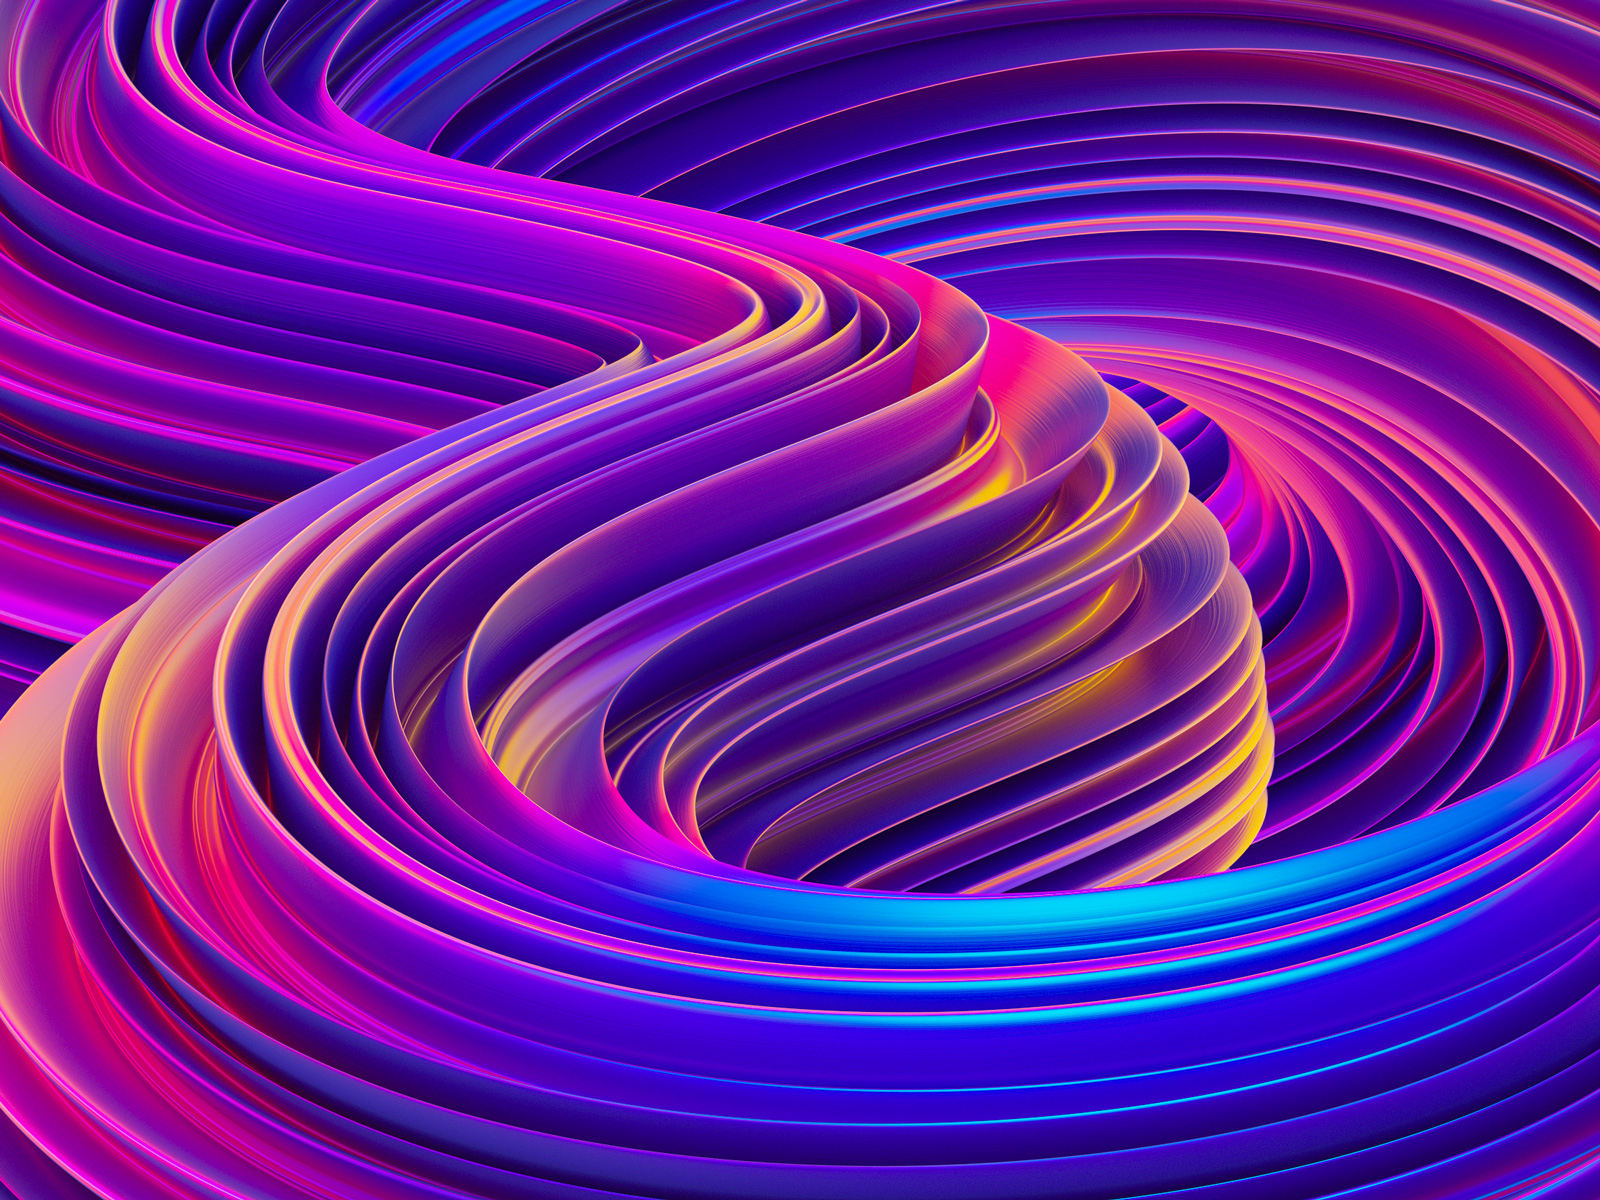 Abstract Liquid 3D Backgrounds #2 by Alexey Boldin on Dribbble